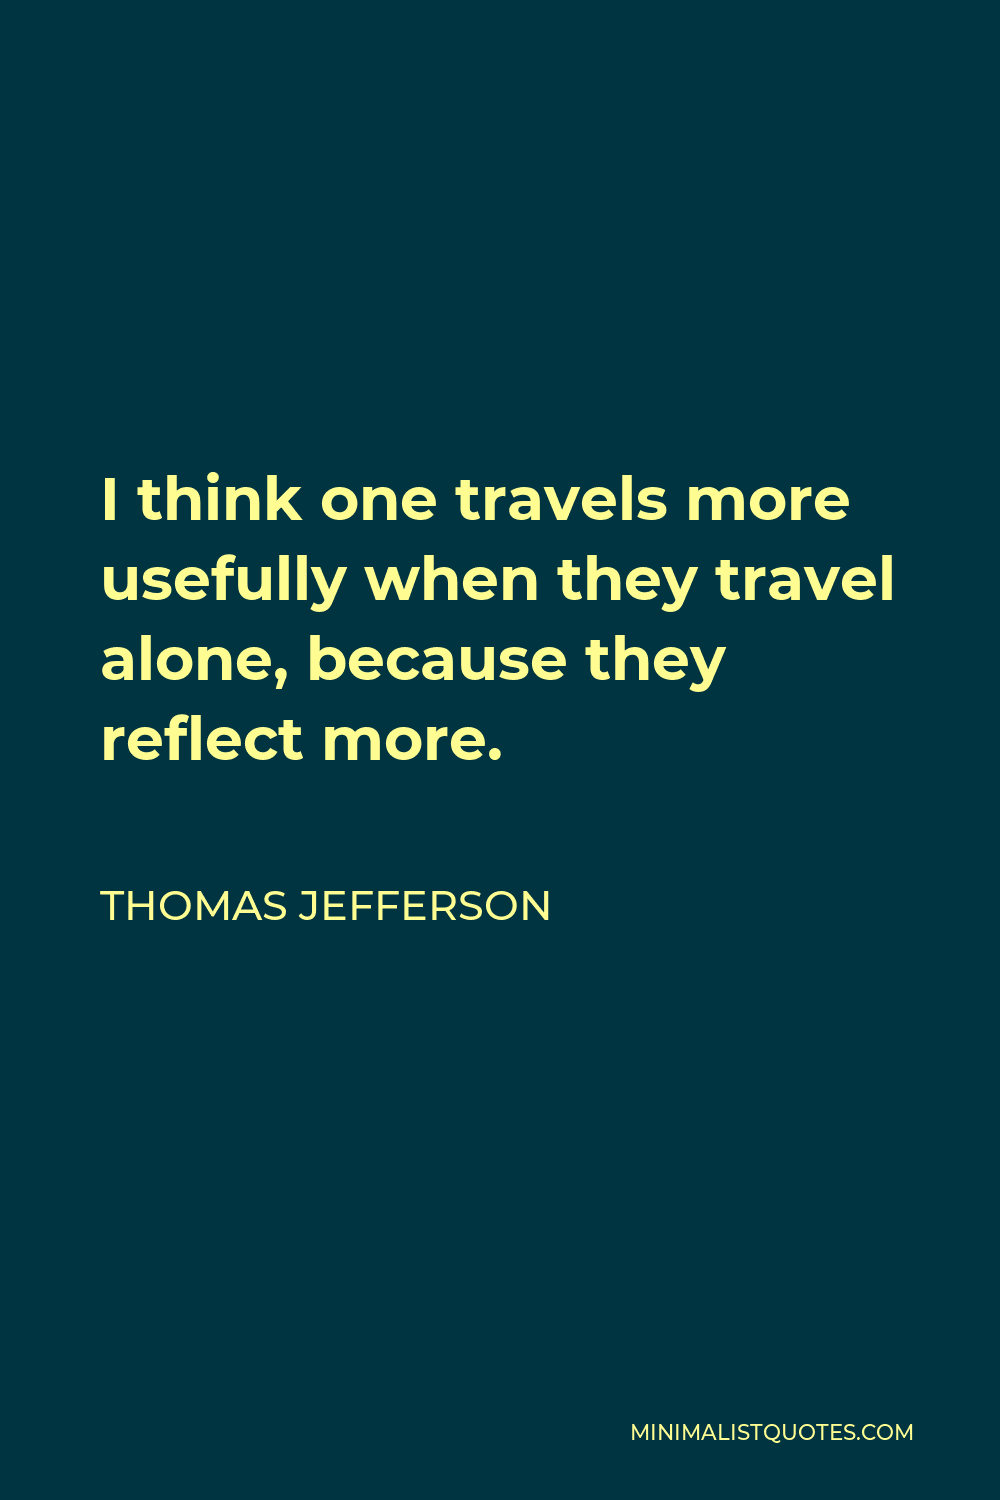 Thomas Jefferson Quote - I think one travels more usefully when they travel alone, because they reflect more.